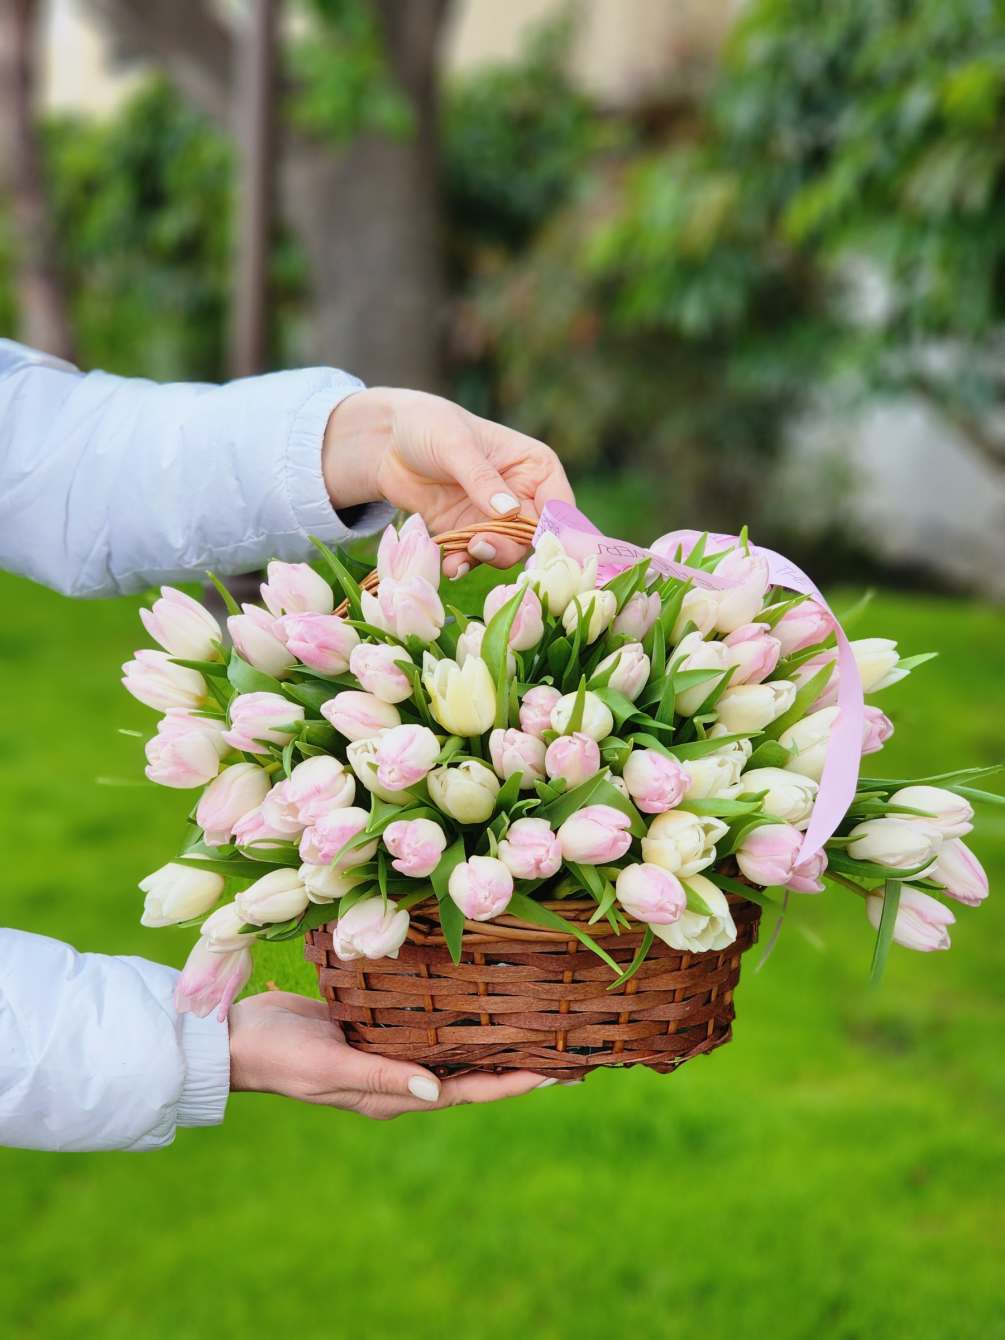 Florists believe that tulips are one of the most romantic flowers, as